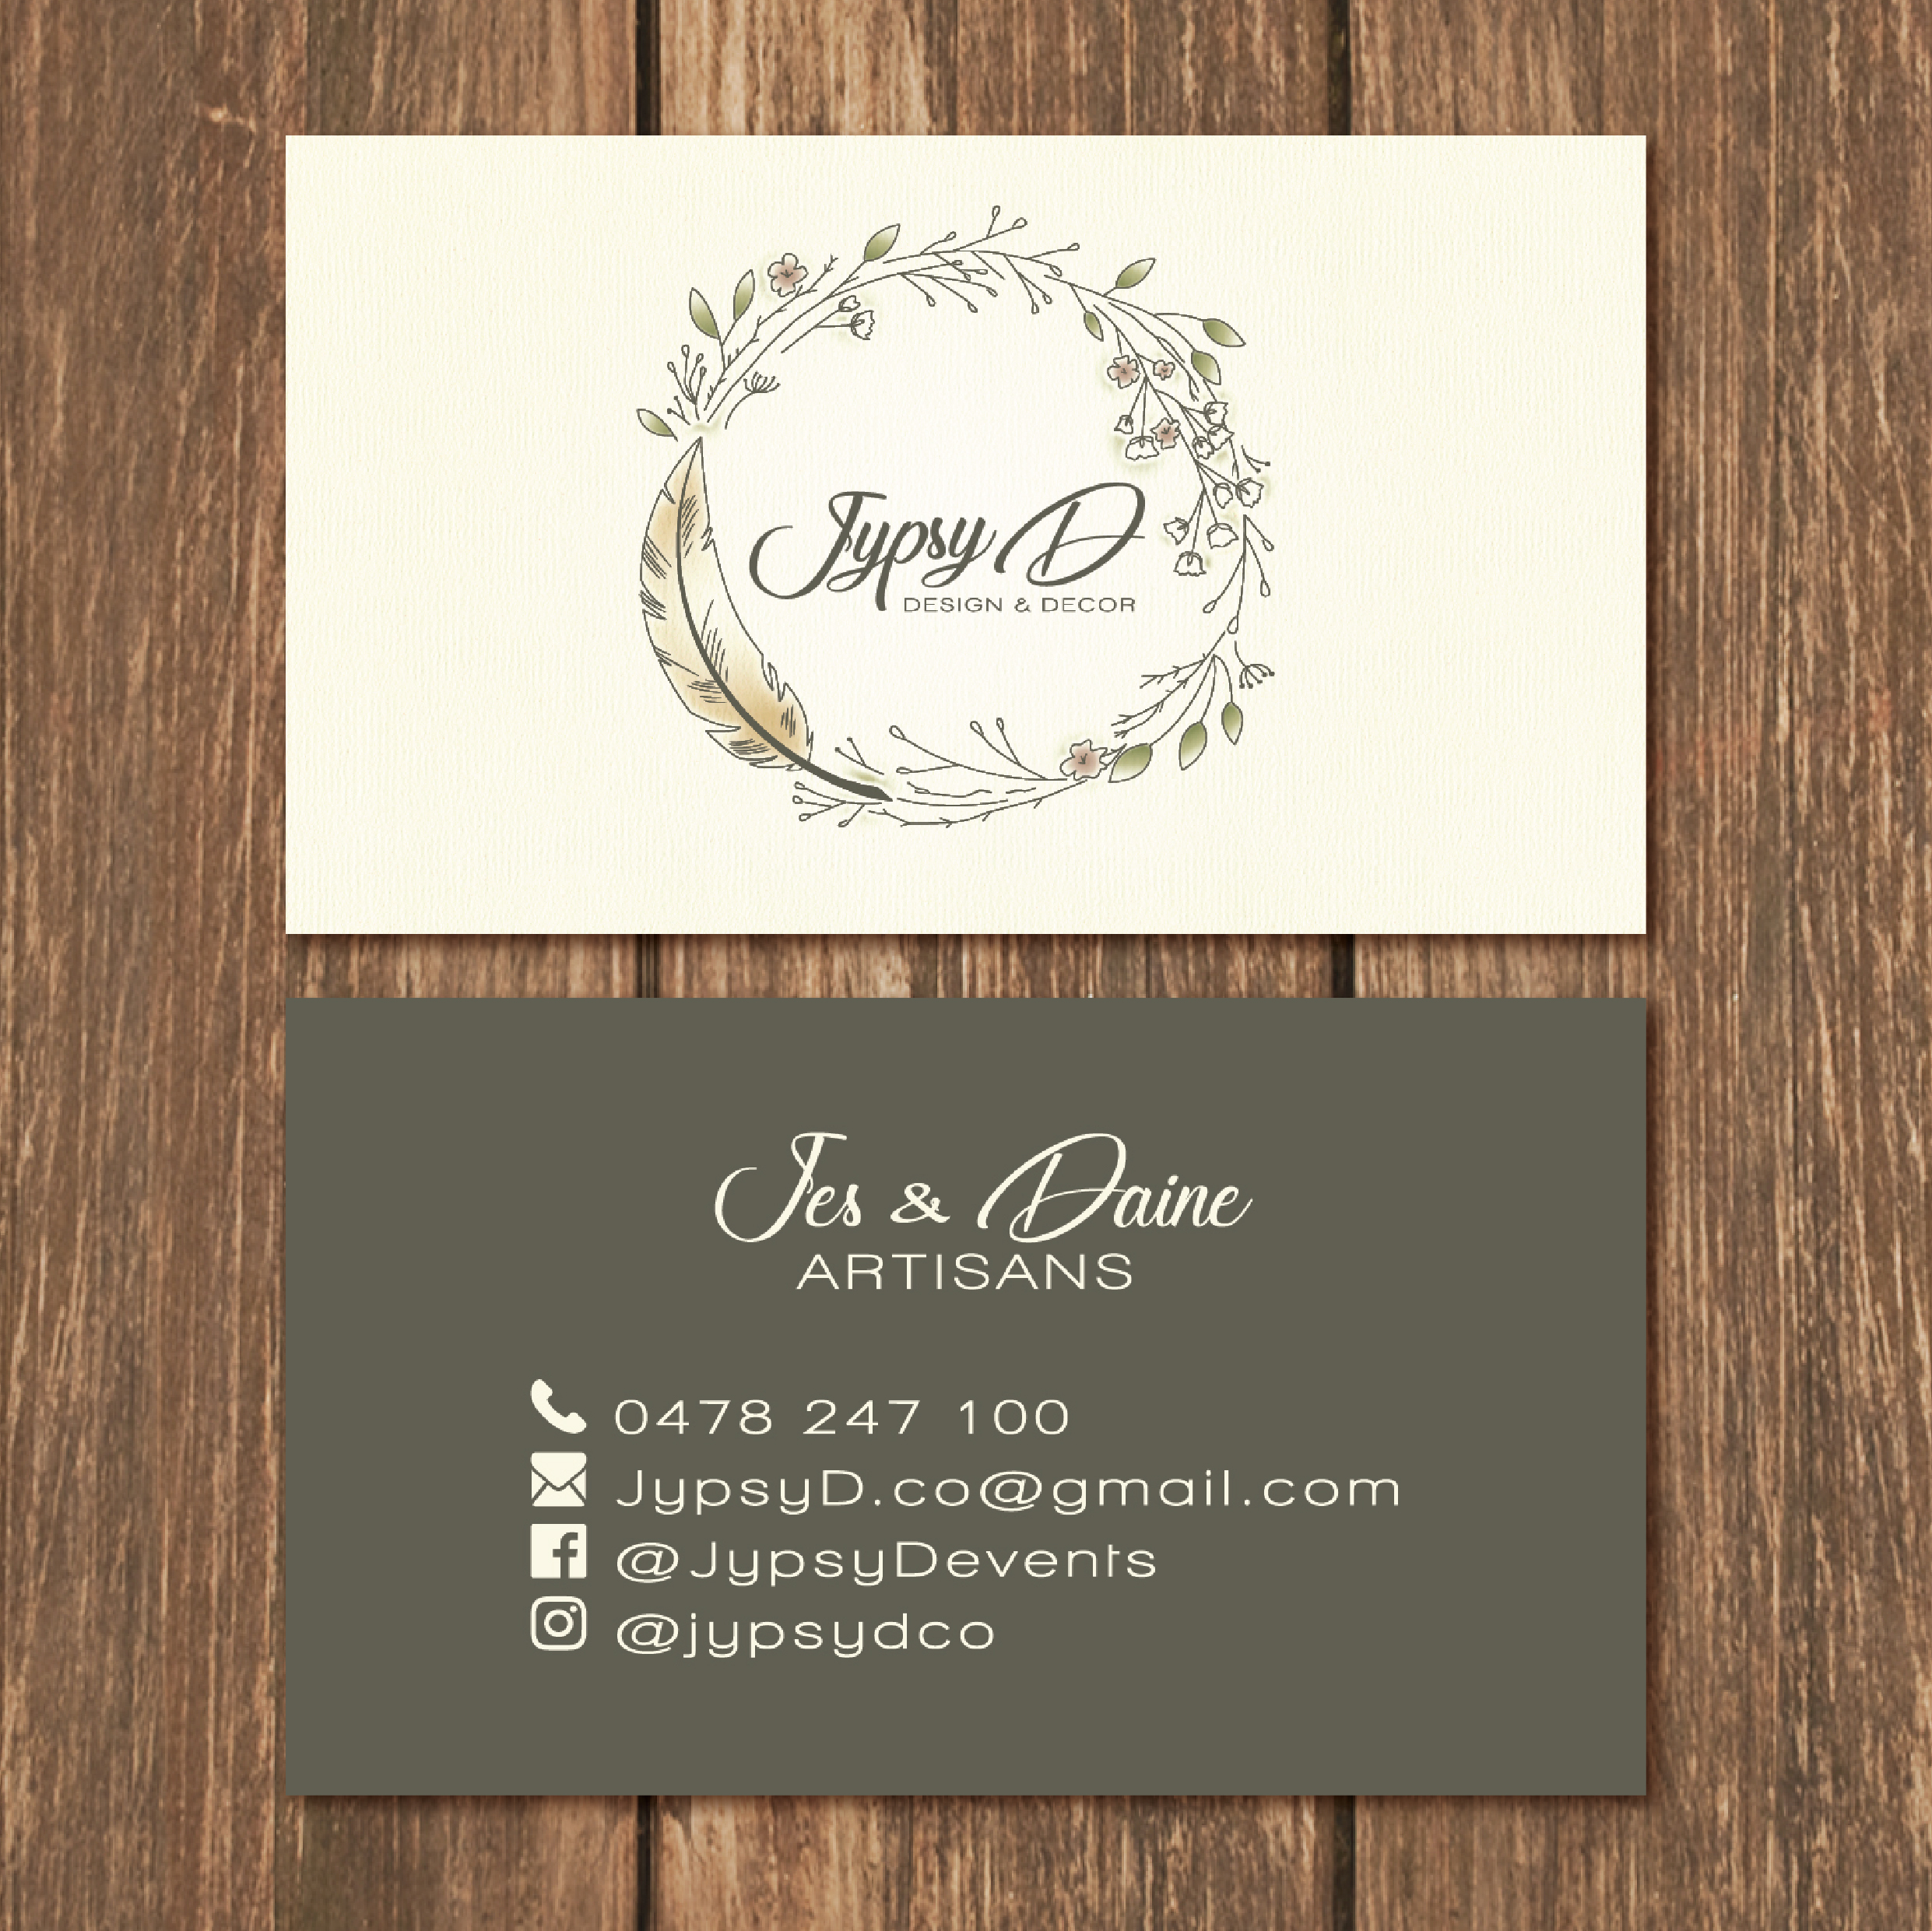 90x55mm Jypsy D Decor and Design BUSINESS CARD with 3mm bleed (2)-02-26.jpg